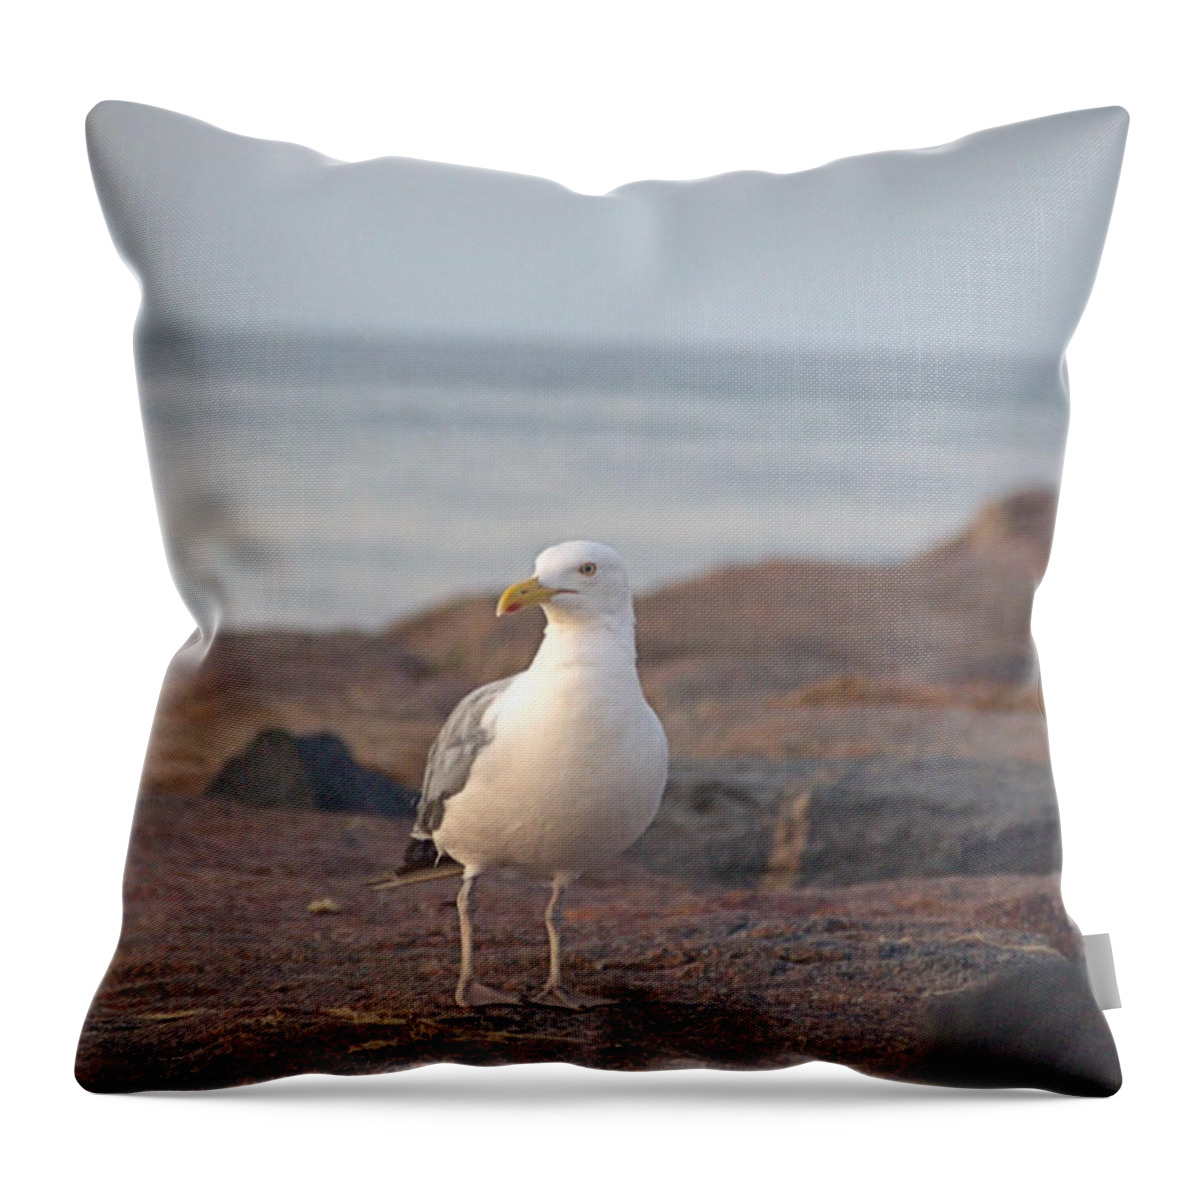 Seagull Throw Pillow featuring the photograph Lone Gull by Newwwman